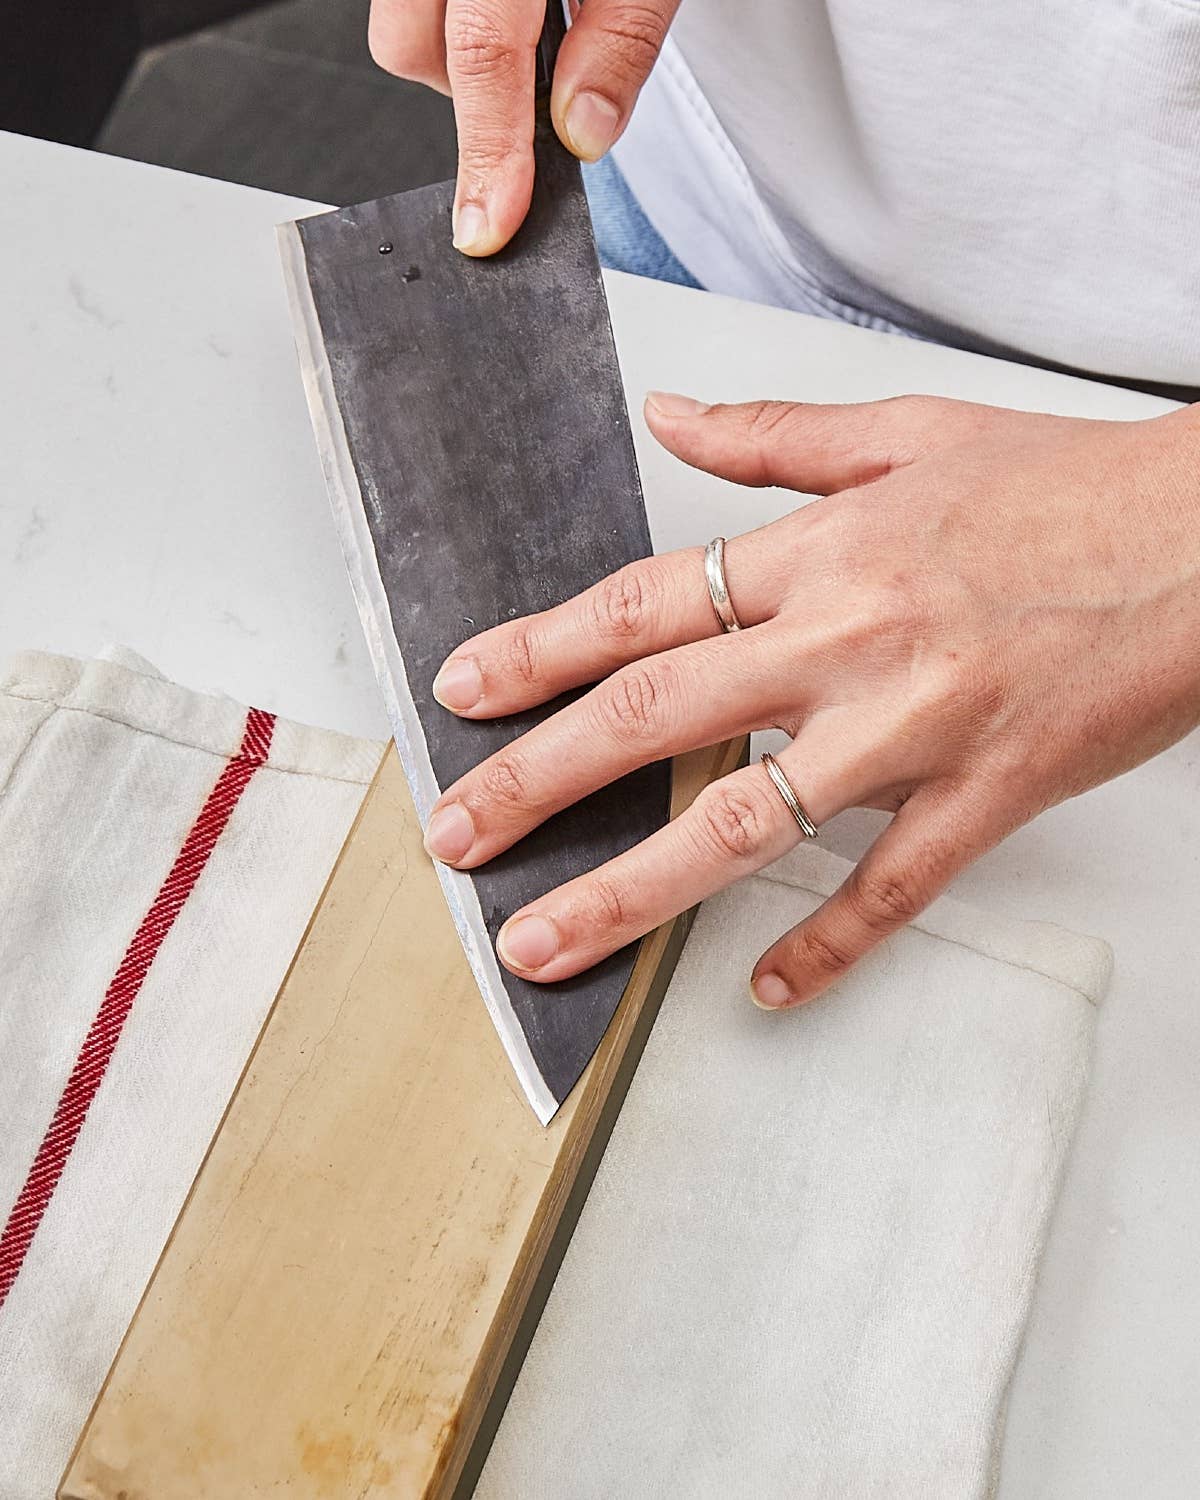 Hone Your Knife (And Sharpening Skills) With This Simple Method